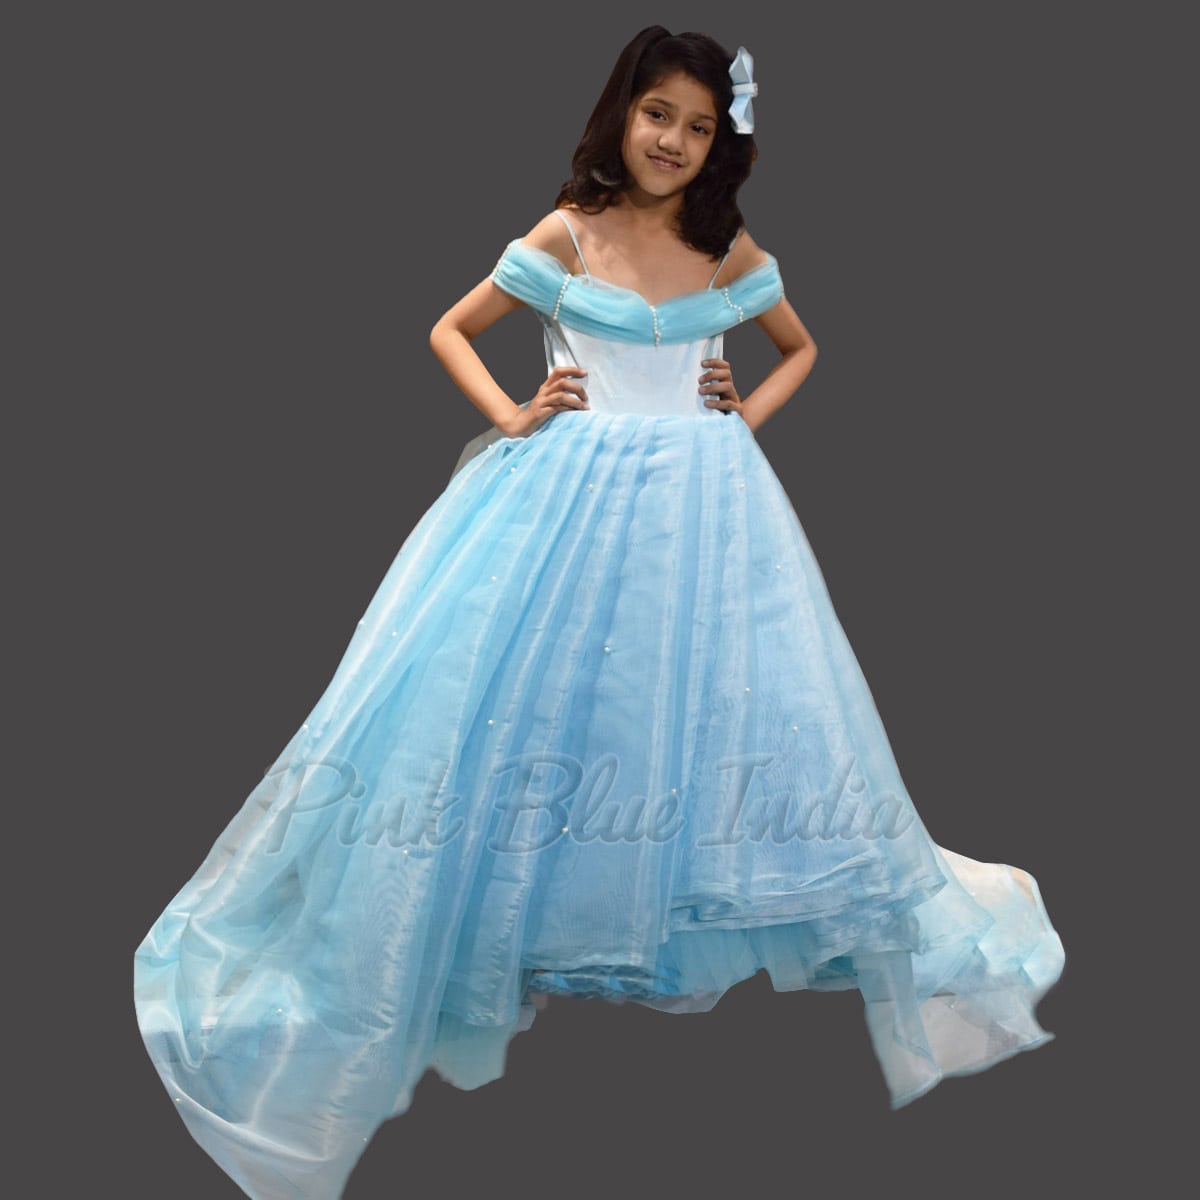 Buy Disguise Cinderella Movie Deluxe Costume, Medium (7-8) Online at Low  Prices in India - Amazon.in